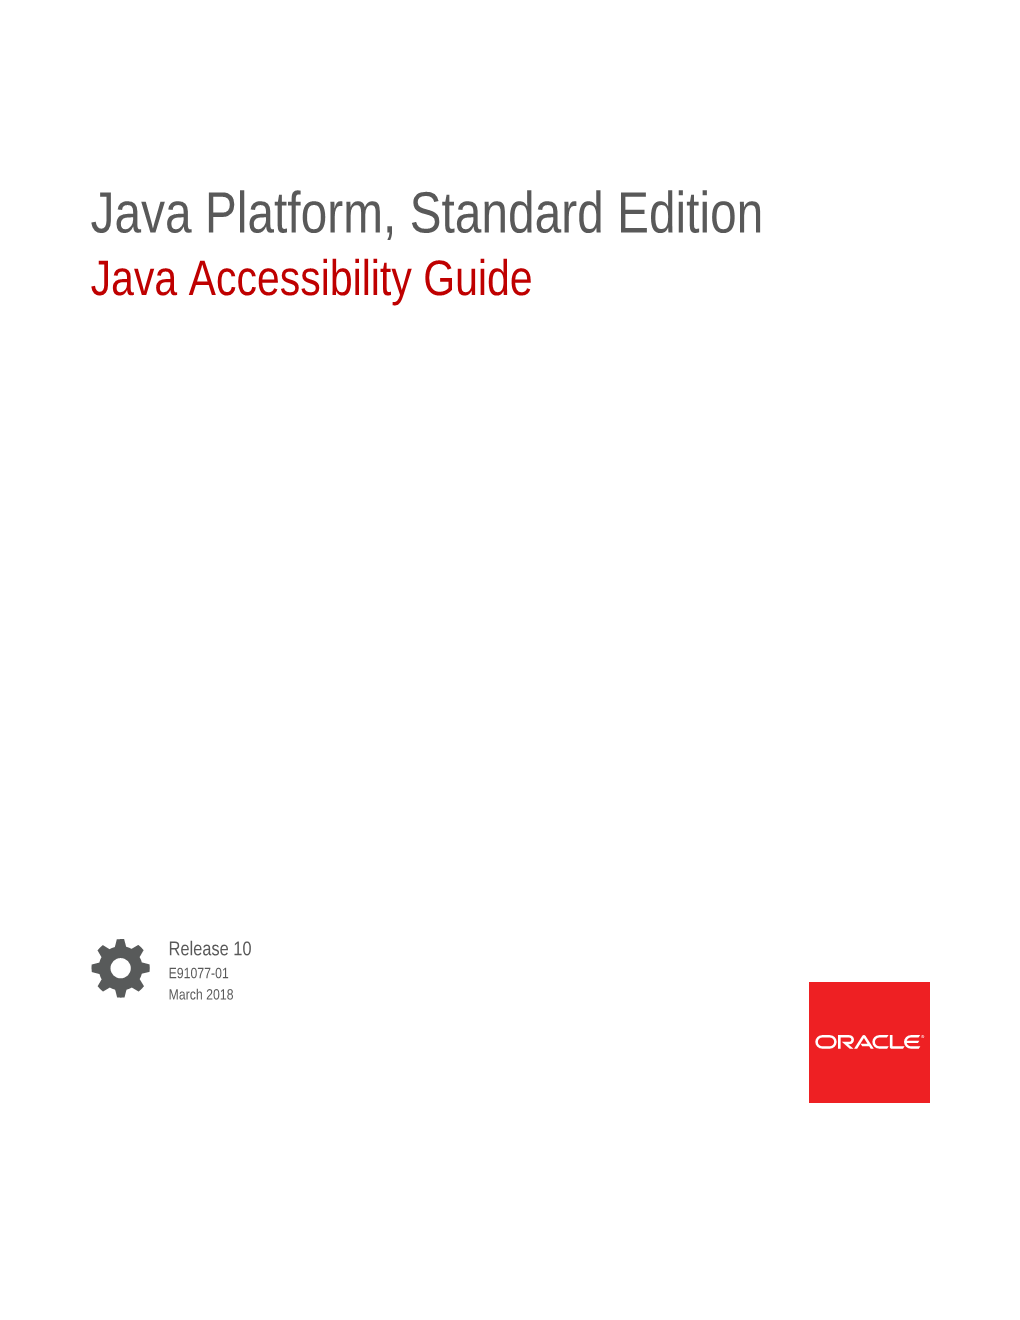 Java Accessibility Guide